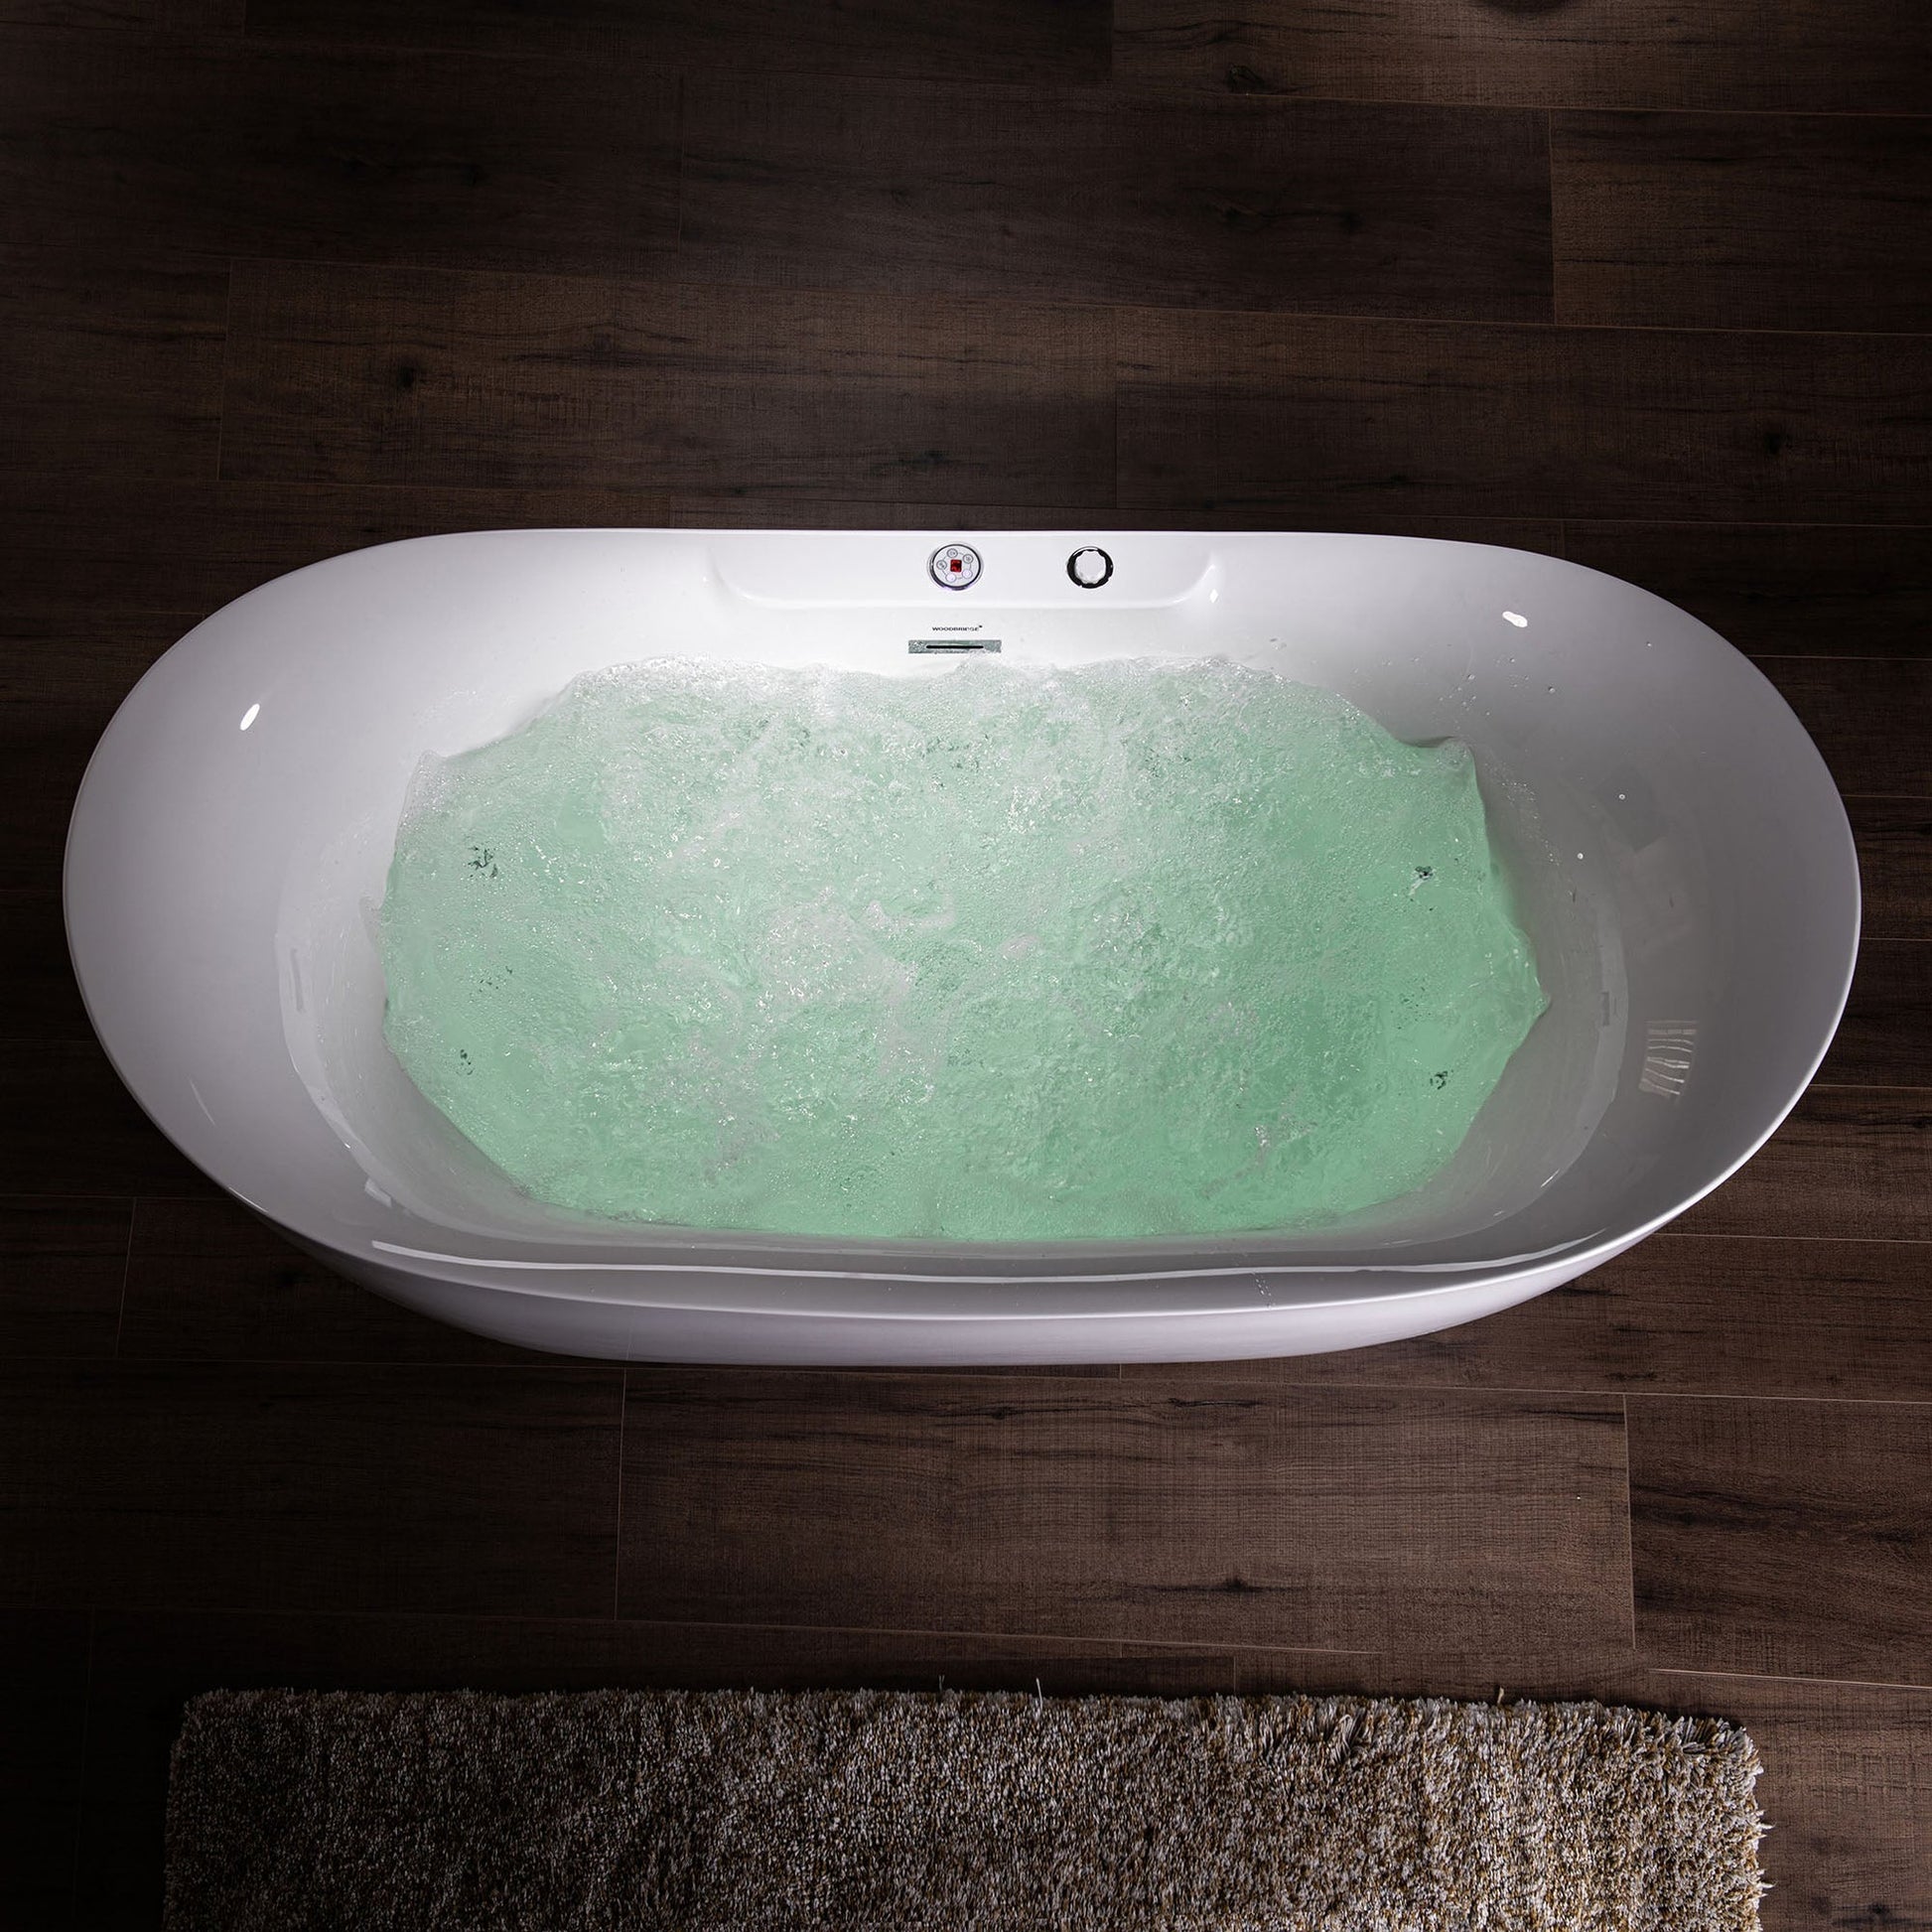 WoodBridge BJ400 72" White Whirlpool Water Jetted and Air Bubble Freestanding Heated Soaking Combination Bathtub With LED Control Panel